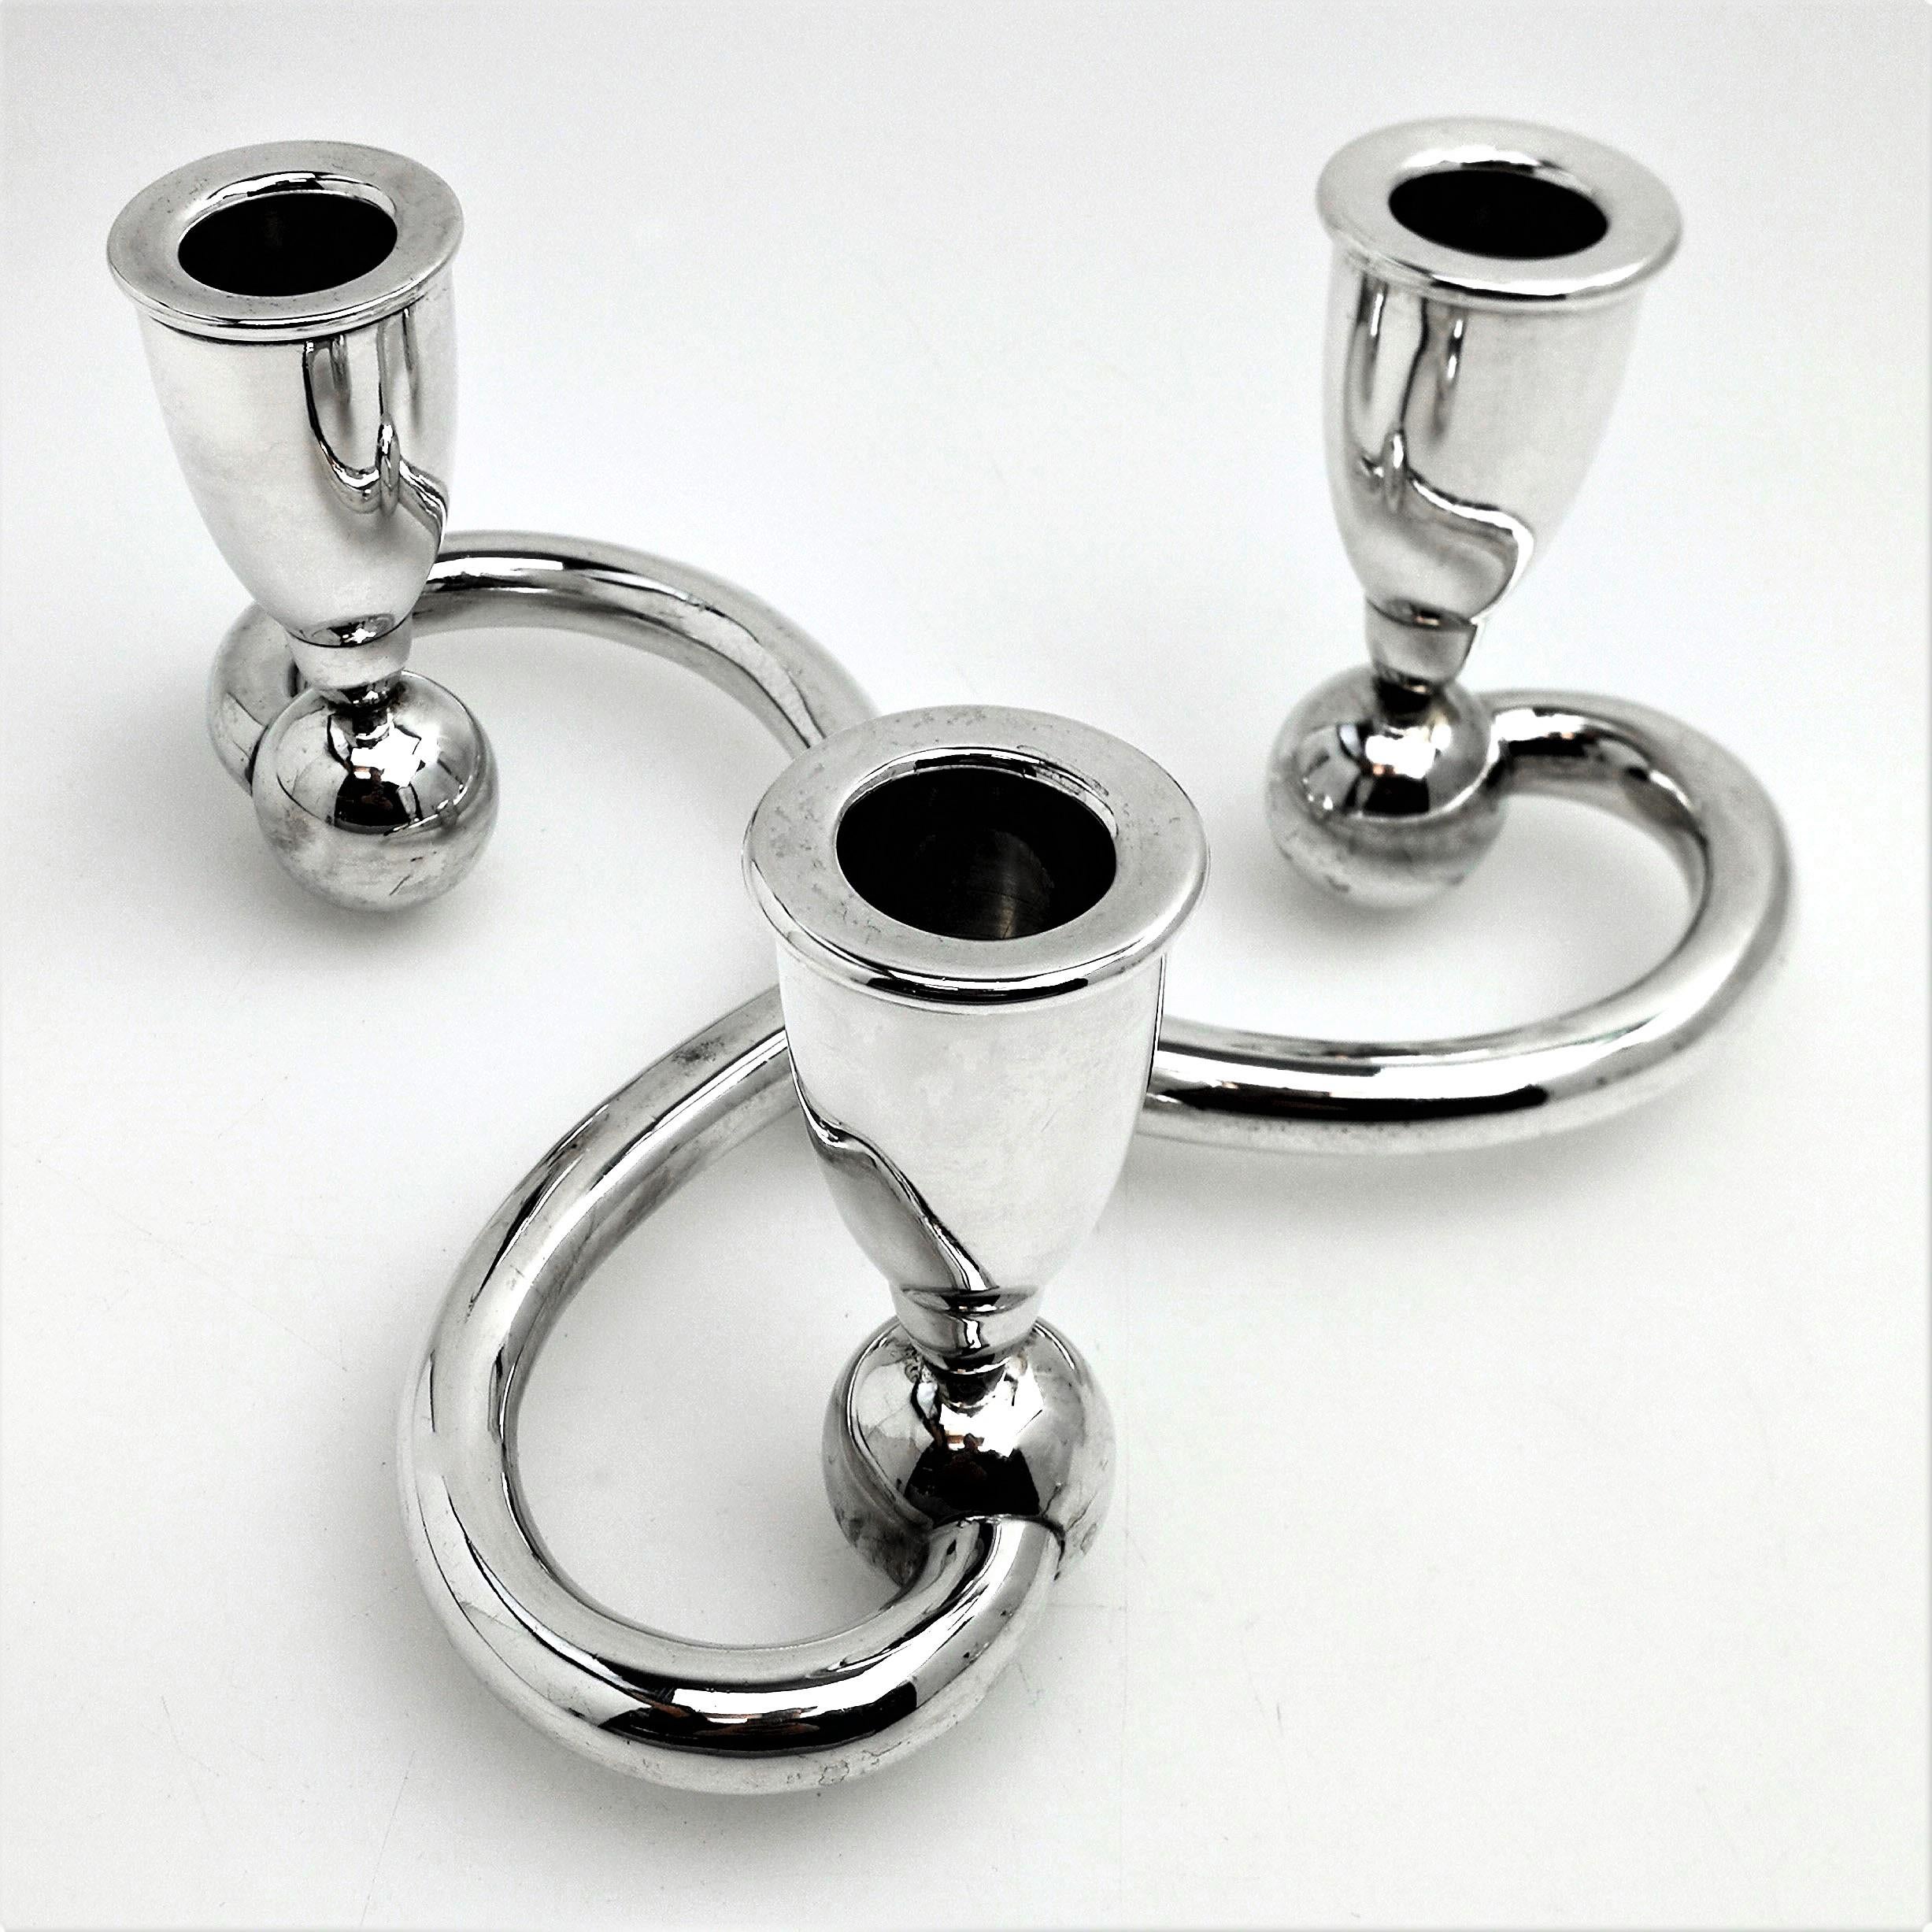 20th Century Pair of Unusual Solid Silver Candelabra circa 1930 German Silber Candle Holders